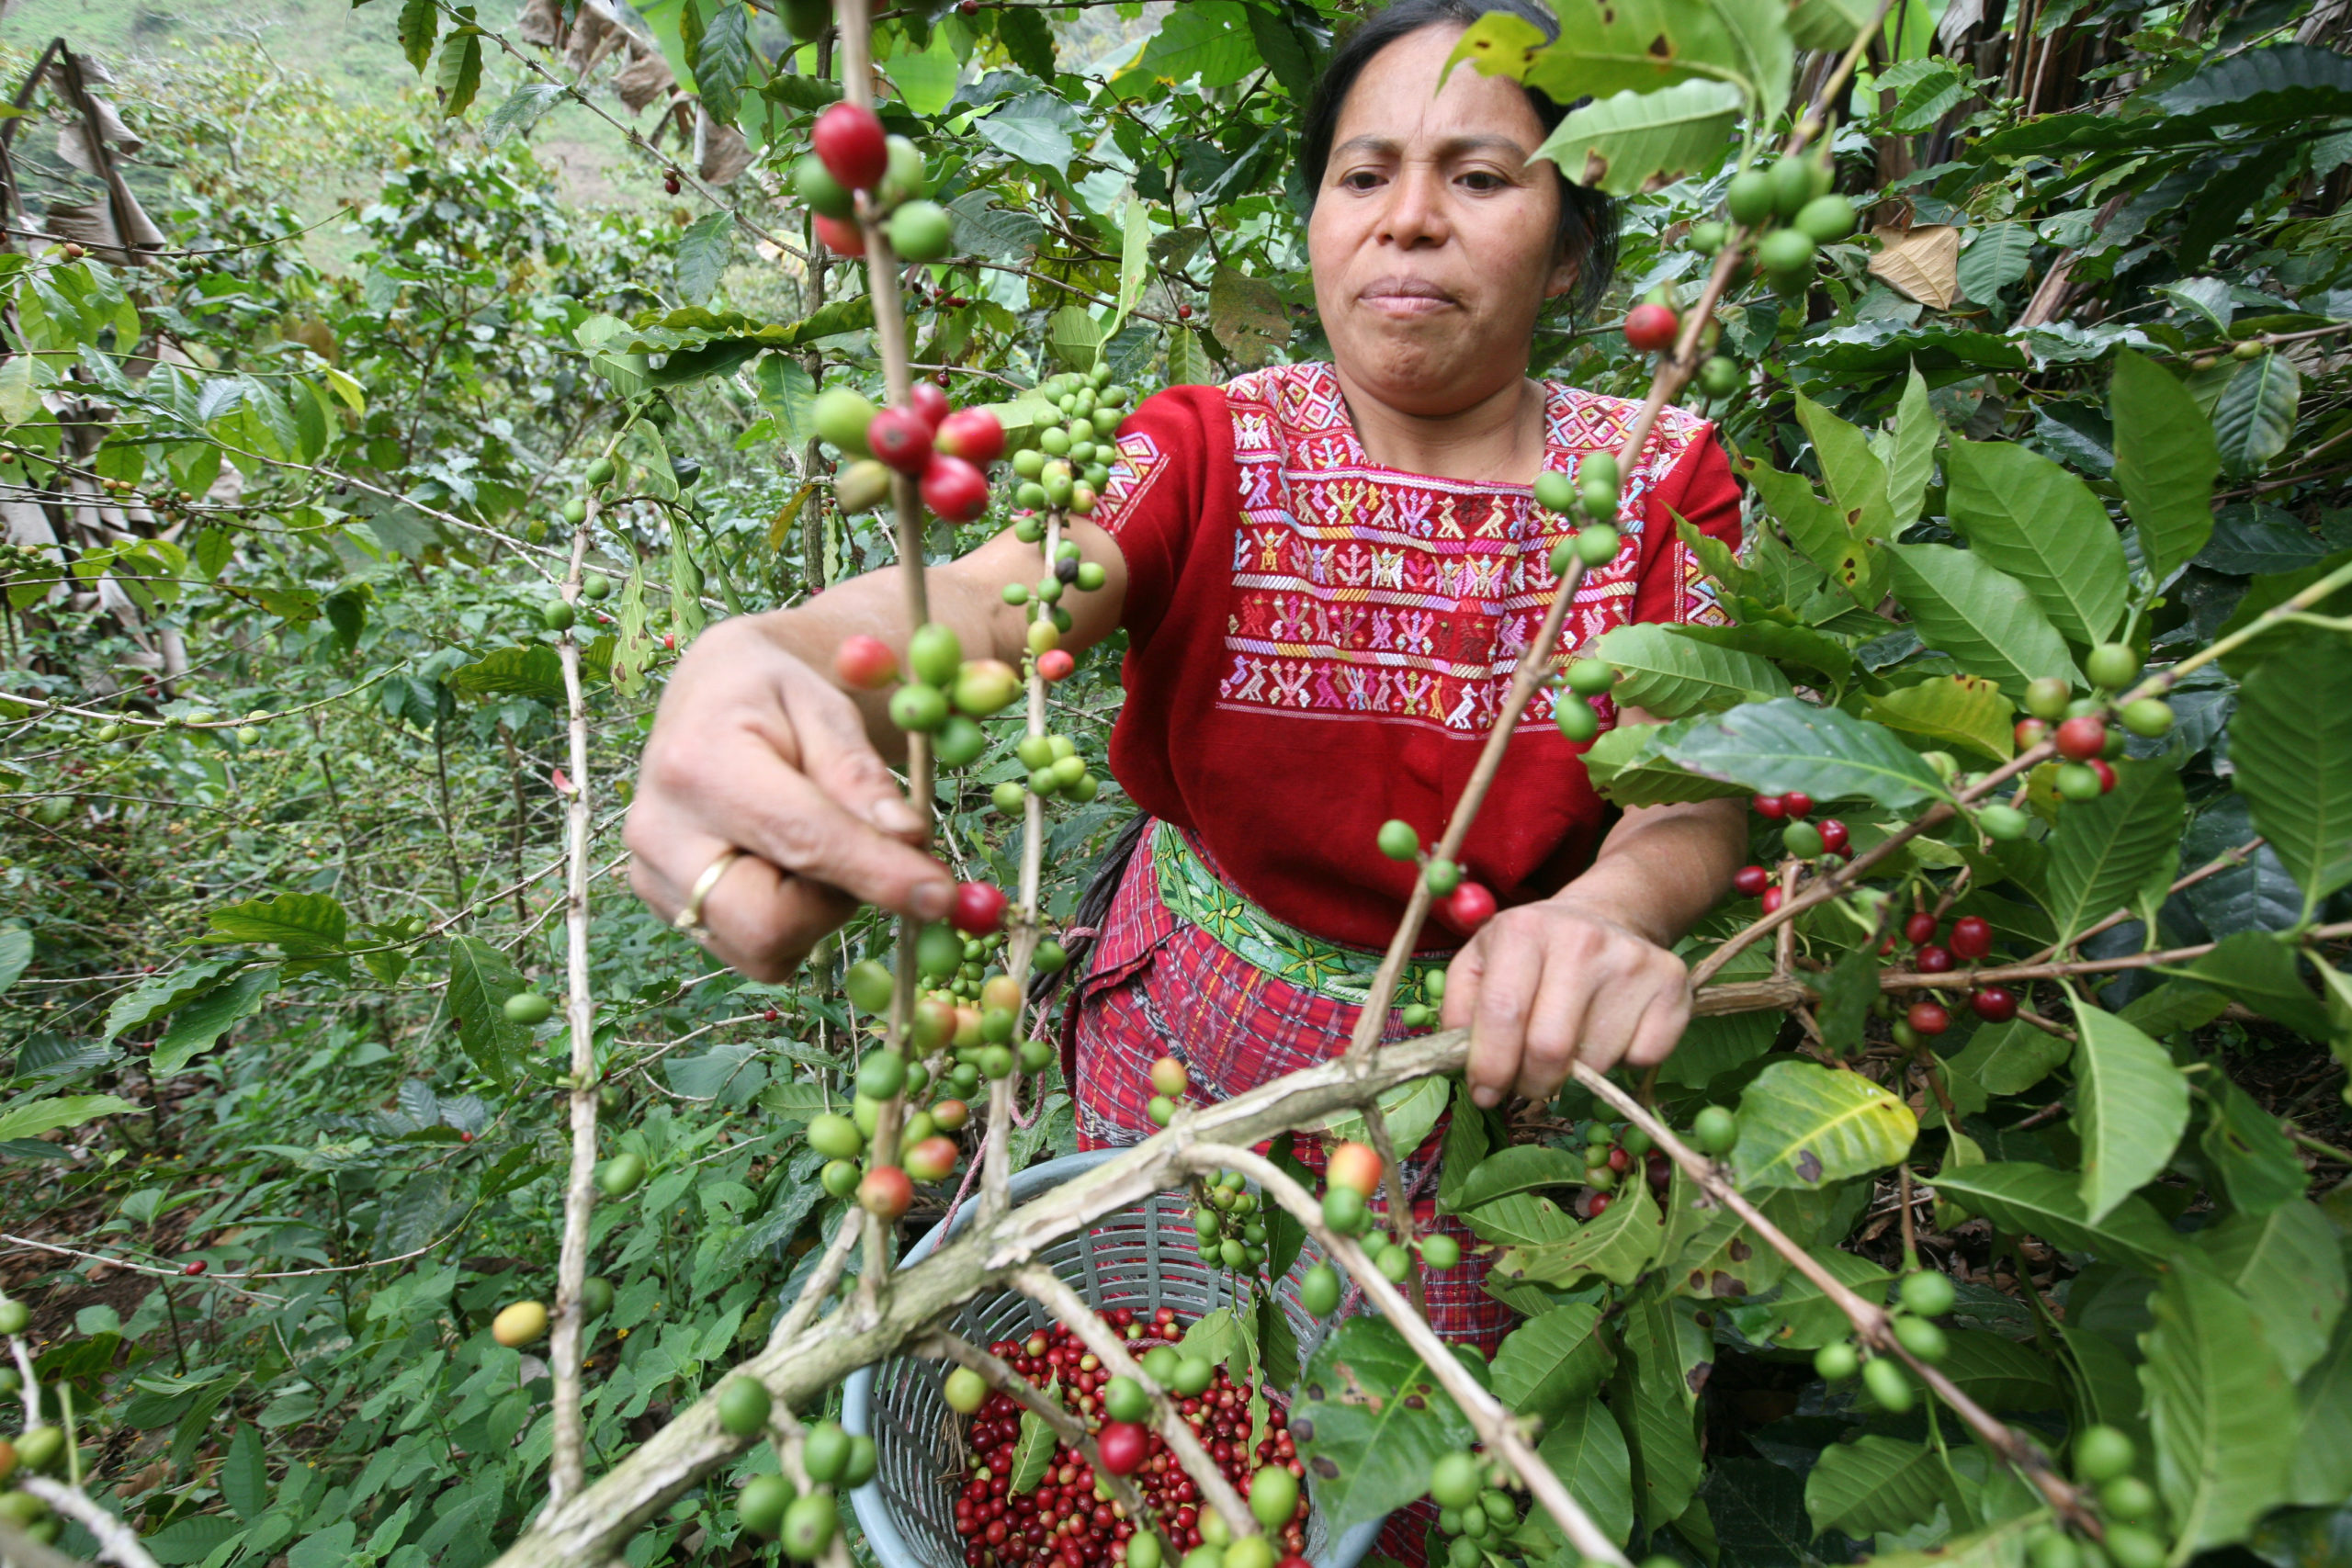 A woman picks coffee on a farm associated with the Maya Ixil coop, a Fairtrade-certified coffee cooperative in Guatemala. Maya Ixil has been a Root Capital client since 2005. Photo by Sean Hawkey.